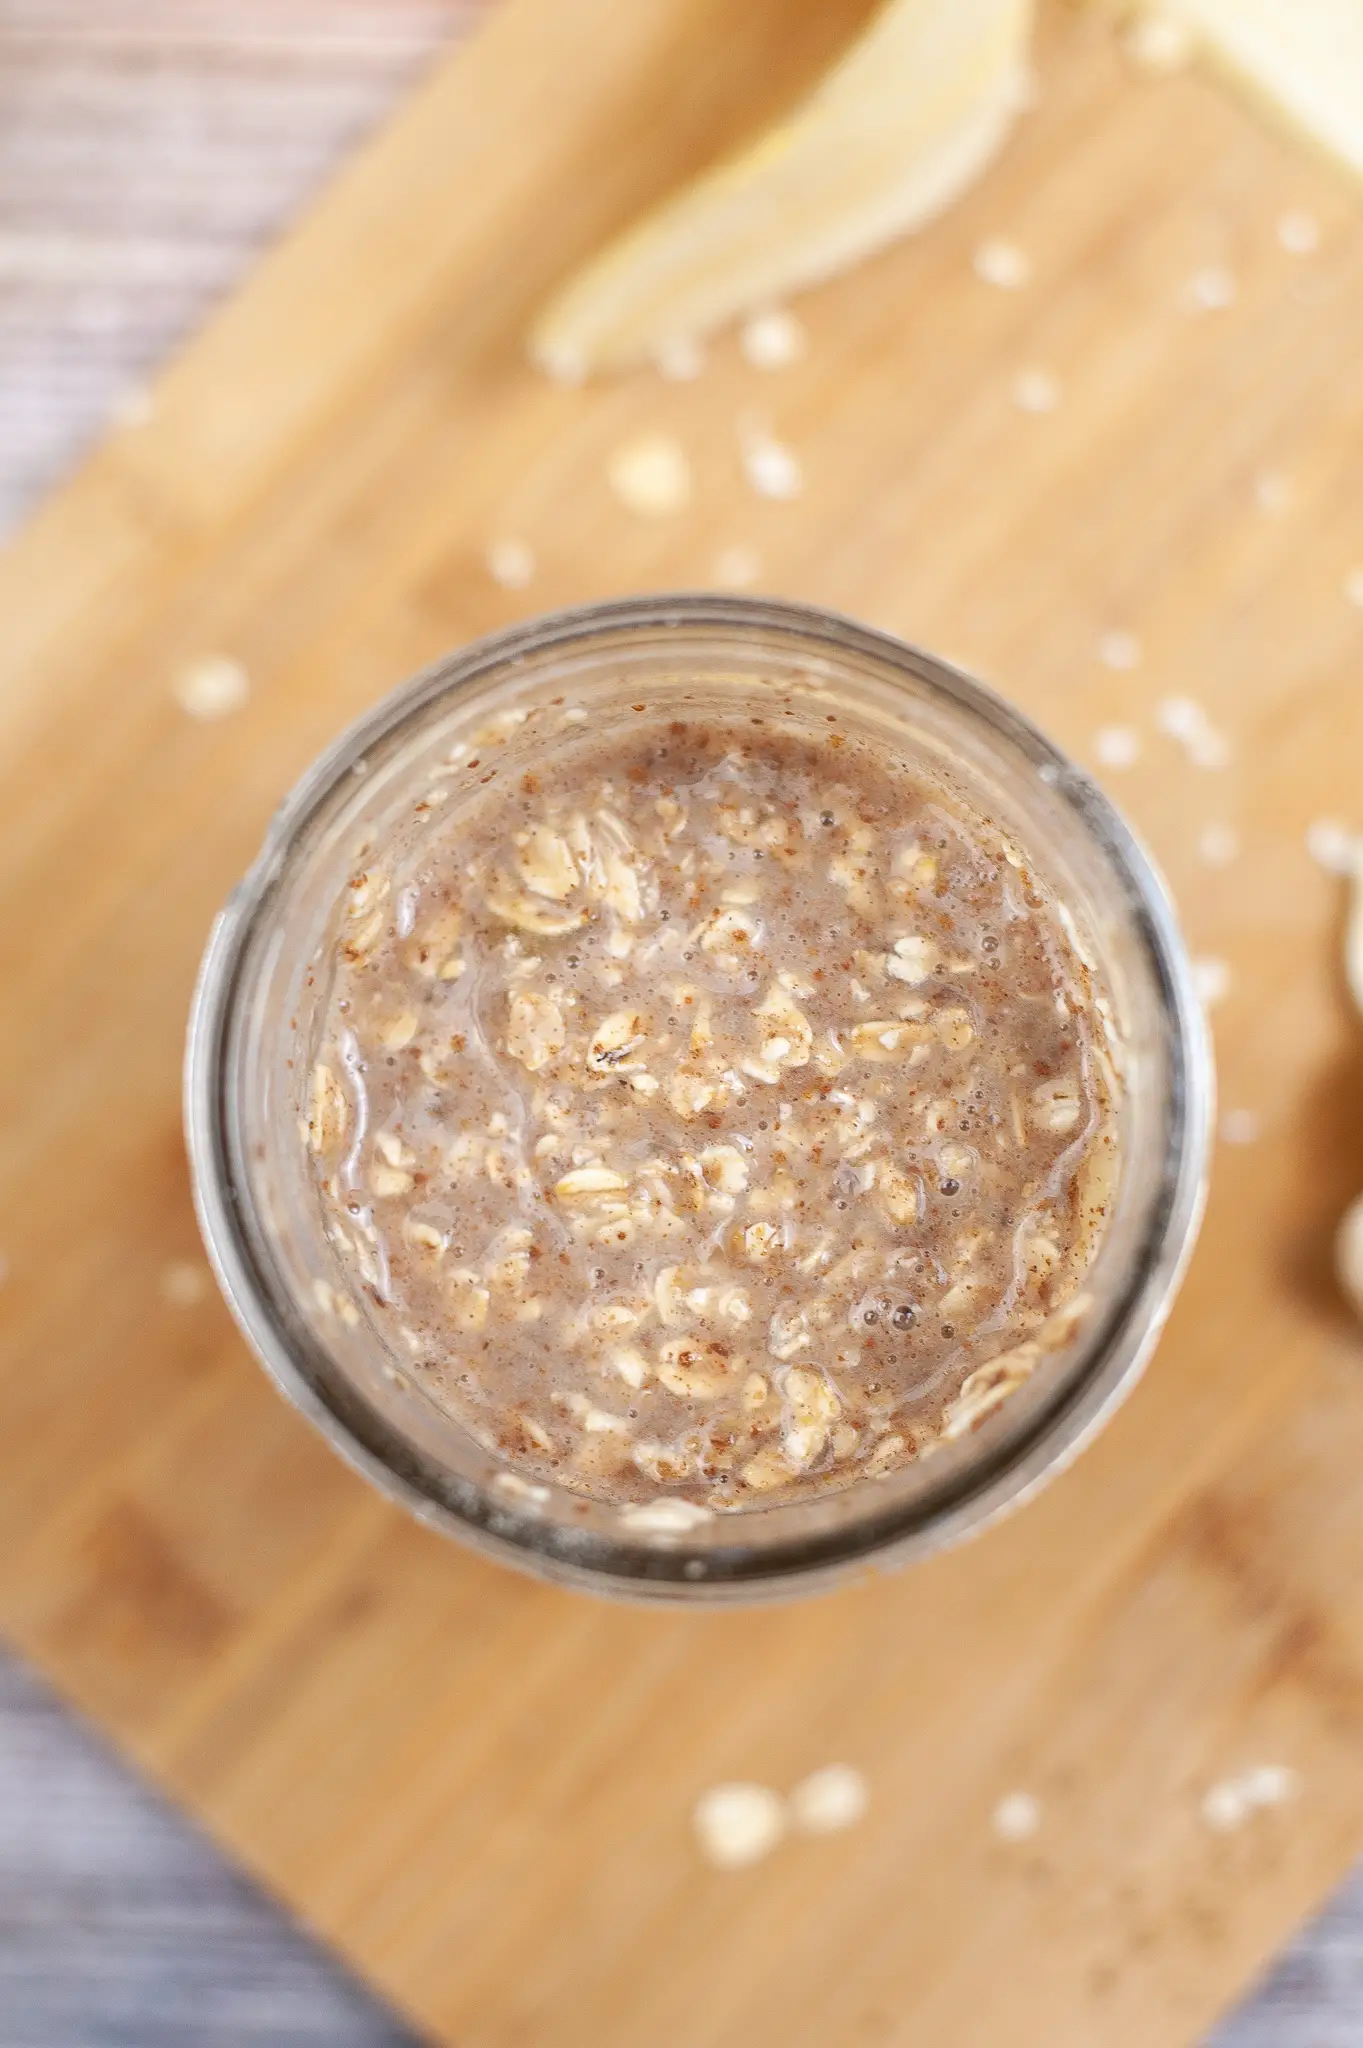 Ingredients for Chocolate Chip Banana Overnight Oats mixed in a jar.